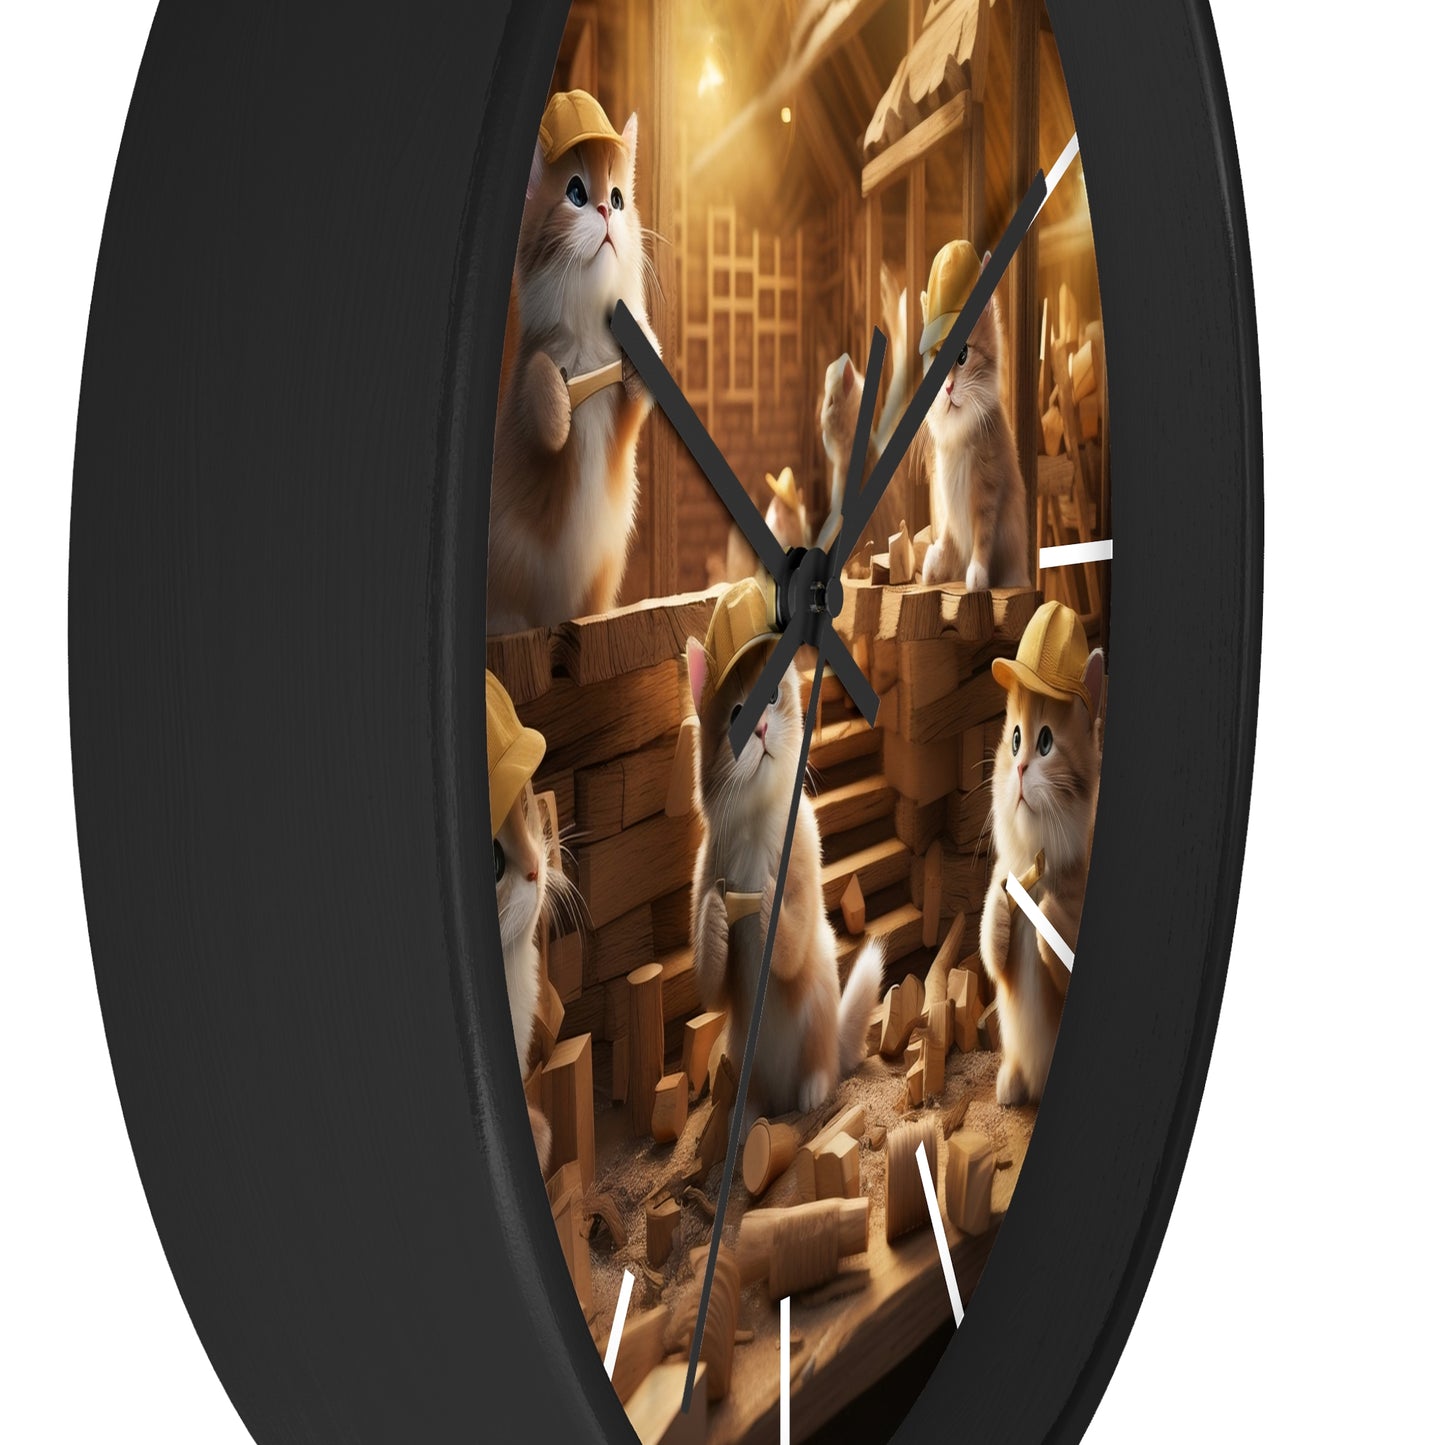 Wall Clock Orange Tabby Cat Remodeling House Home Decor